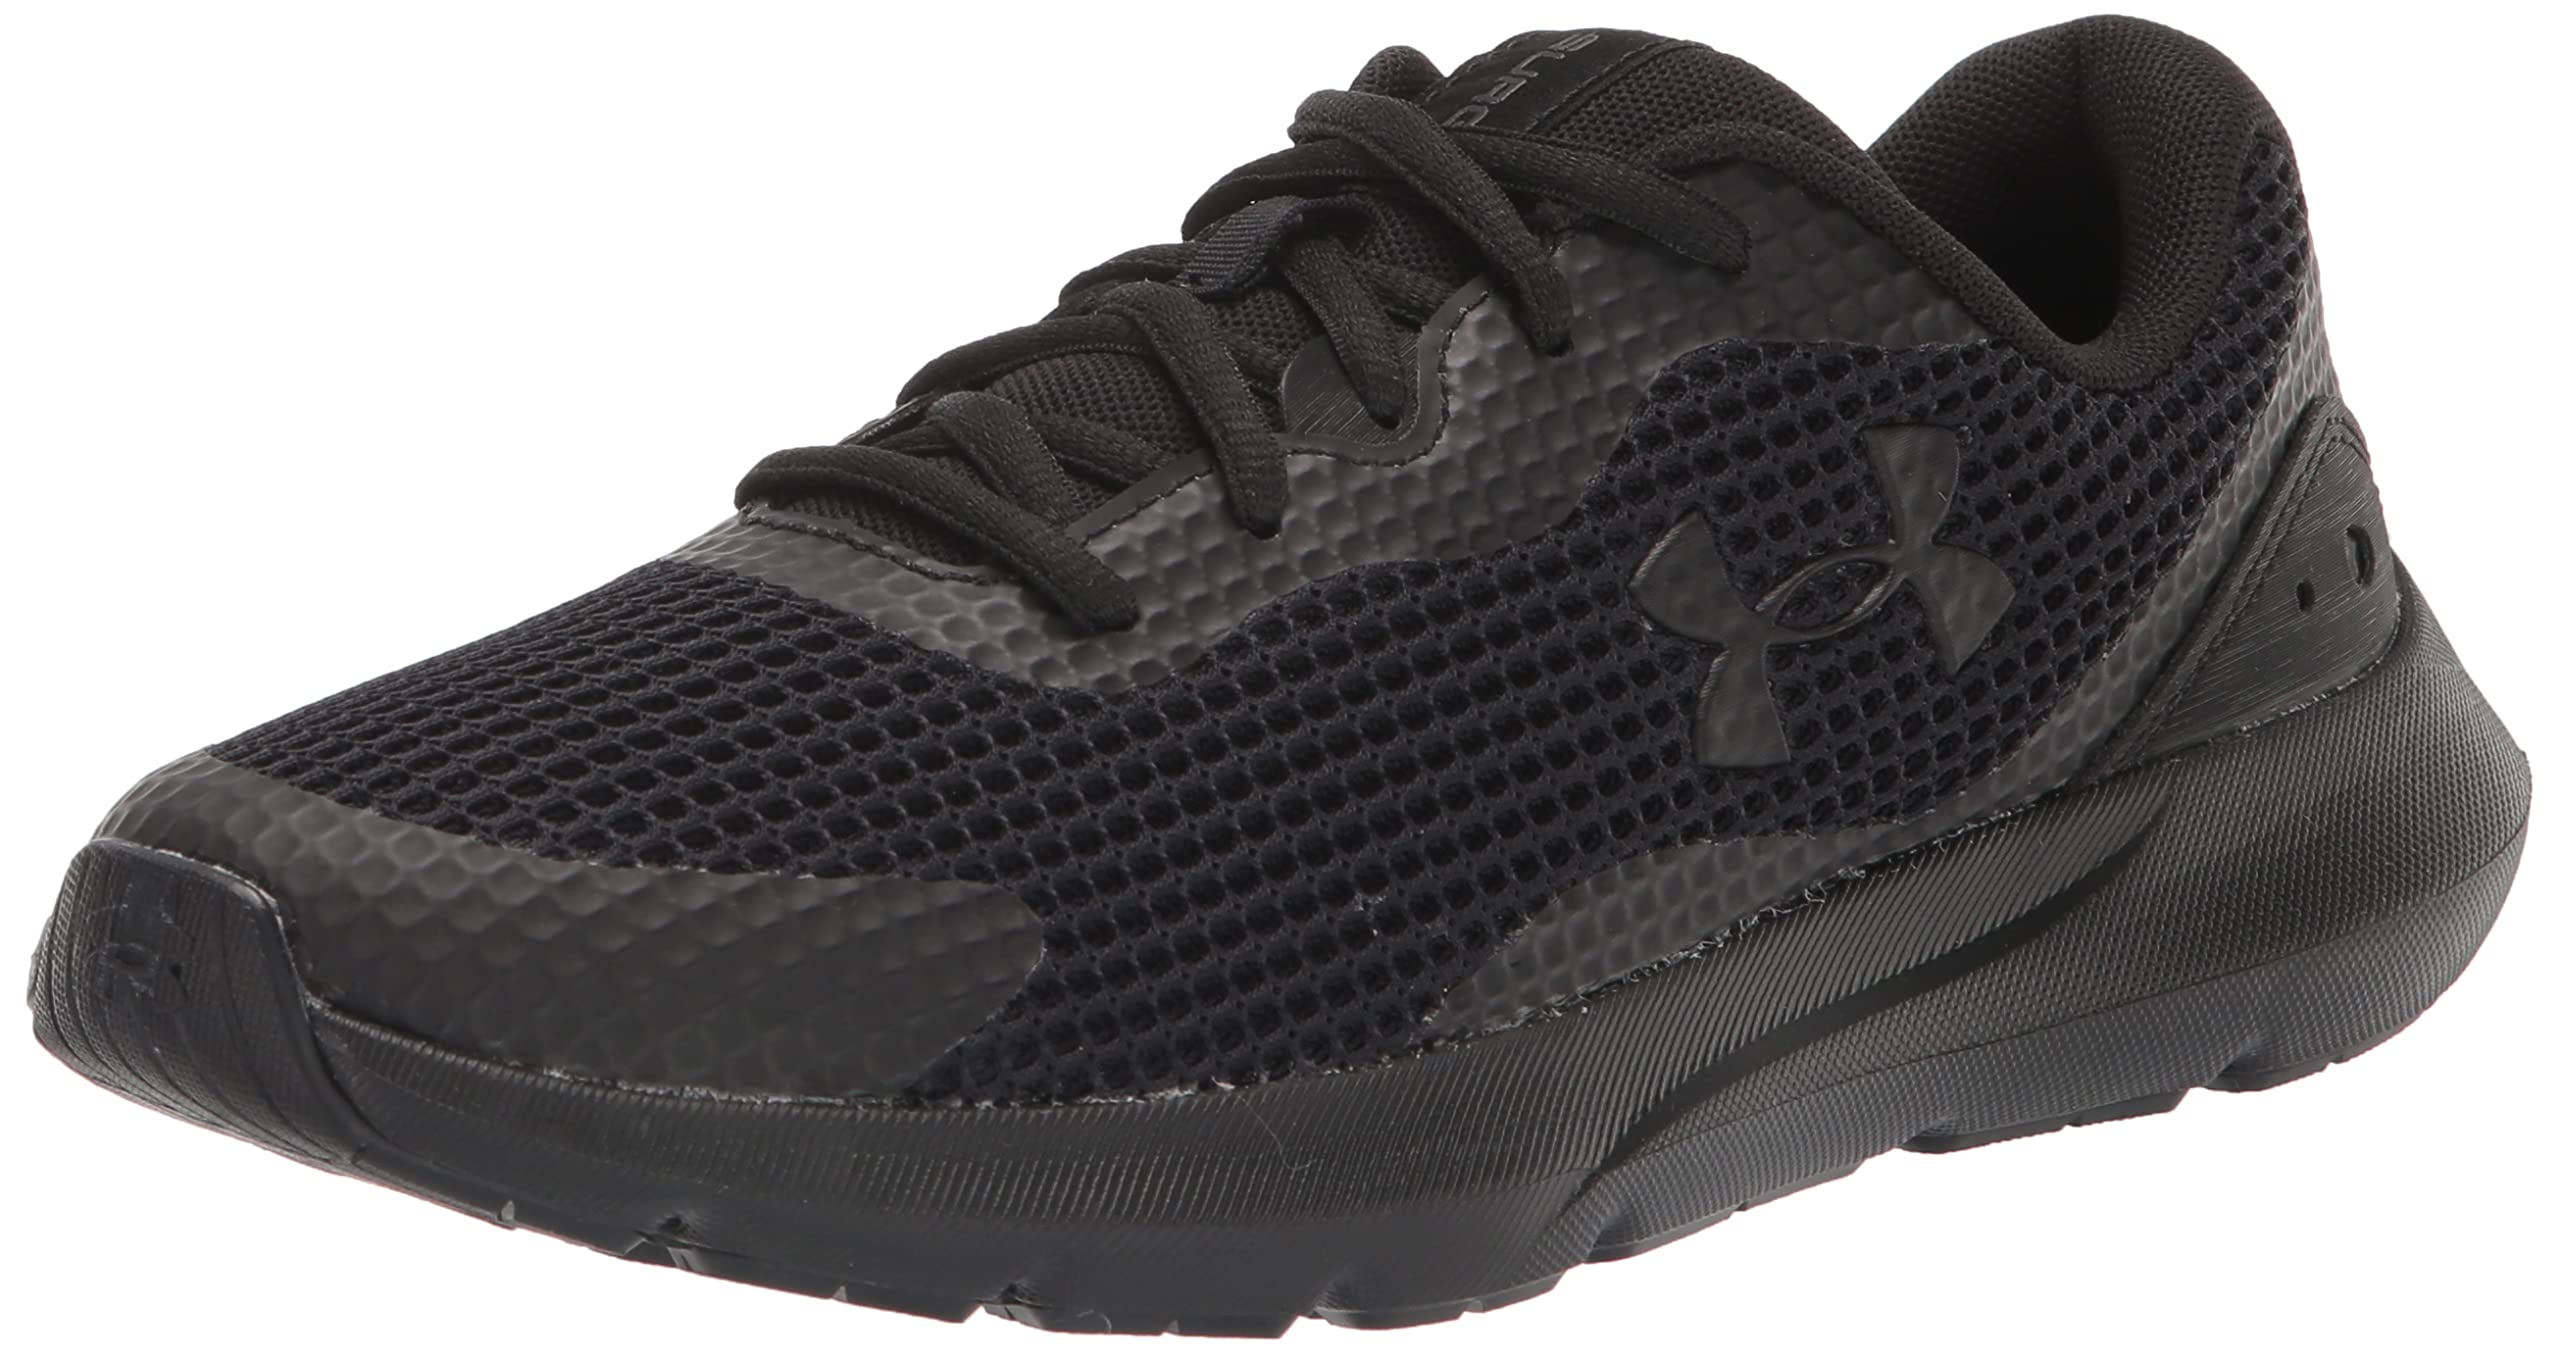 Under Armour Women’s Surge 3 Running Shoes (Black) $26.60 + Free Shipping